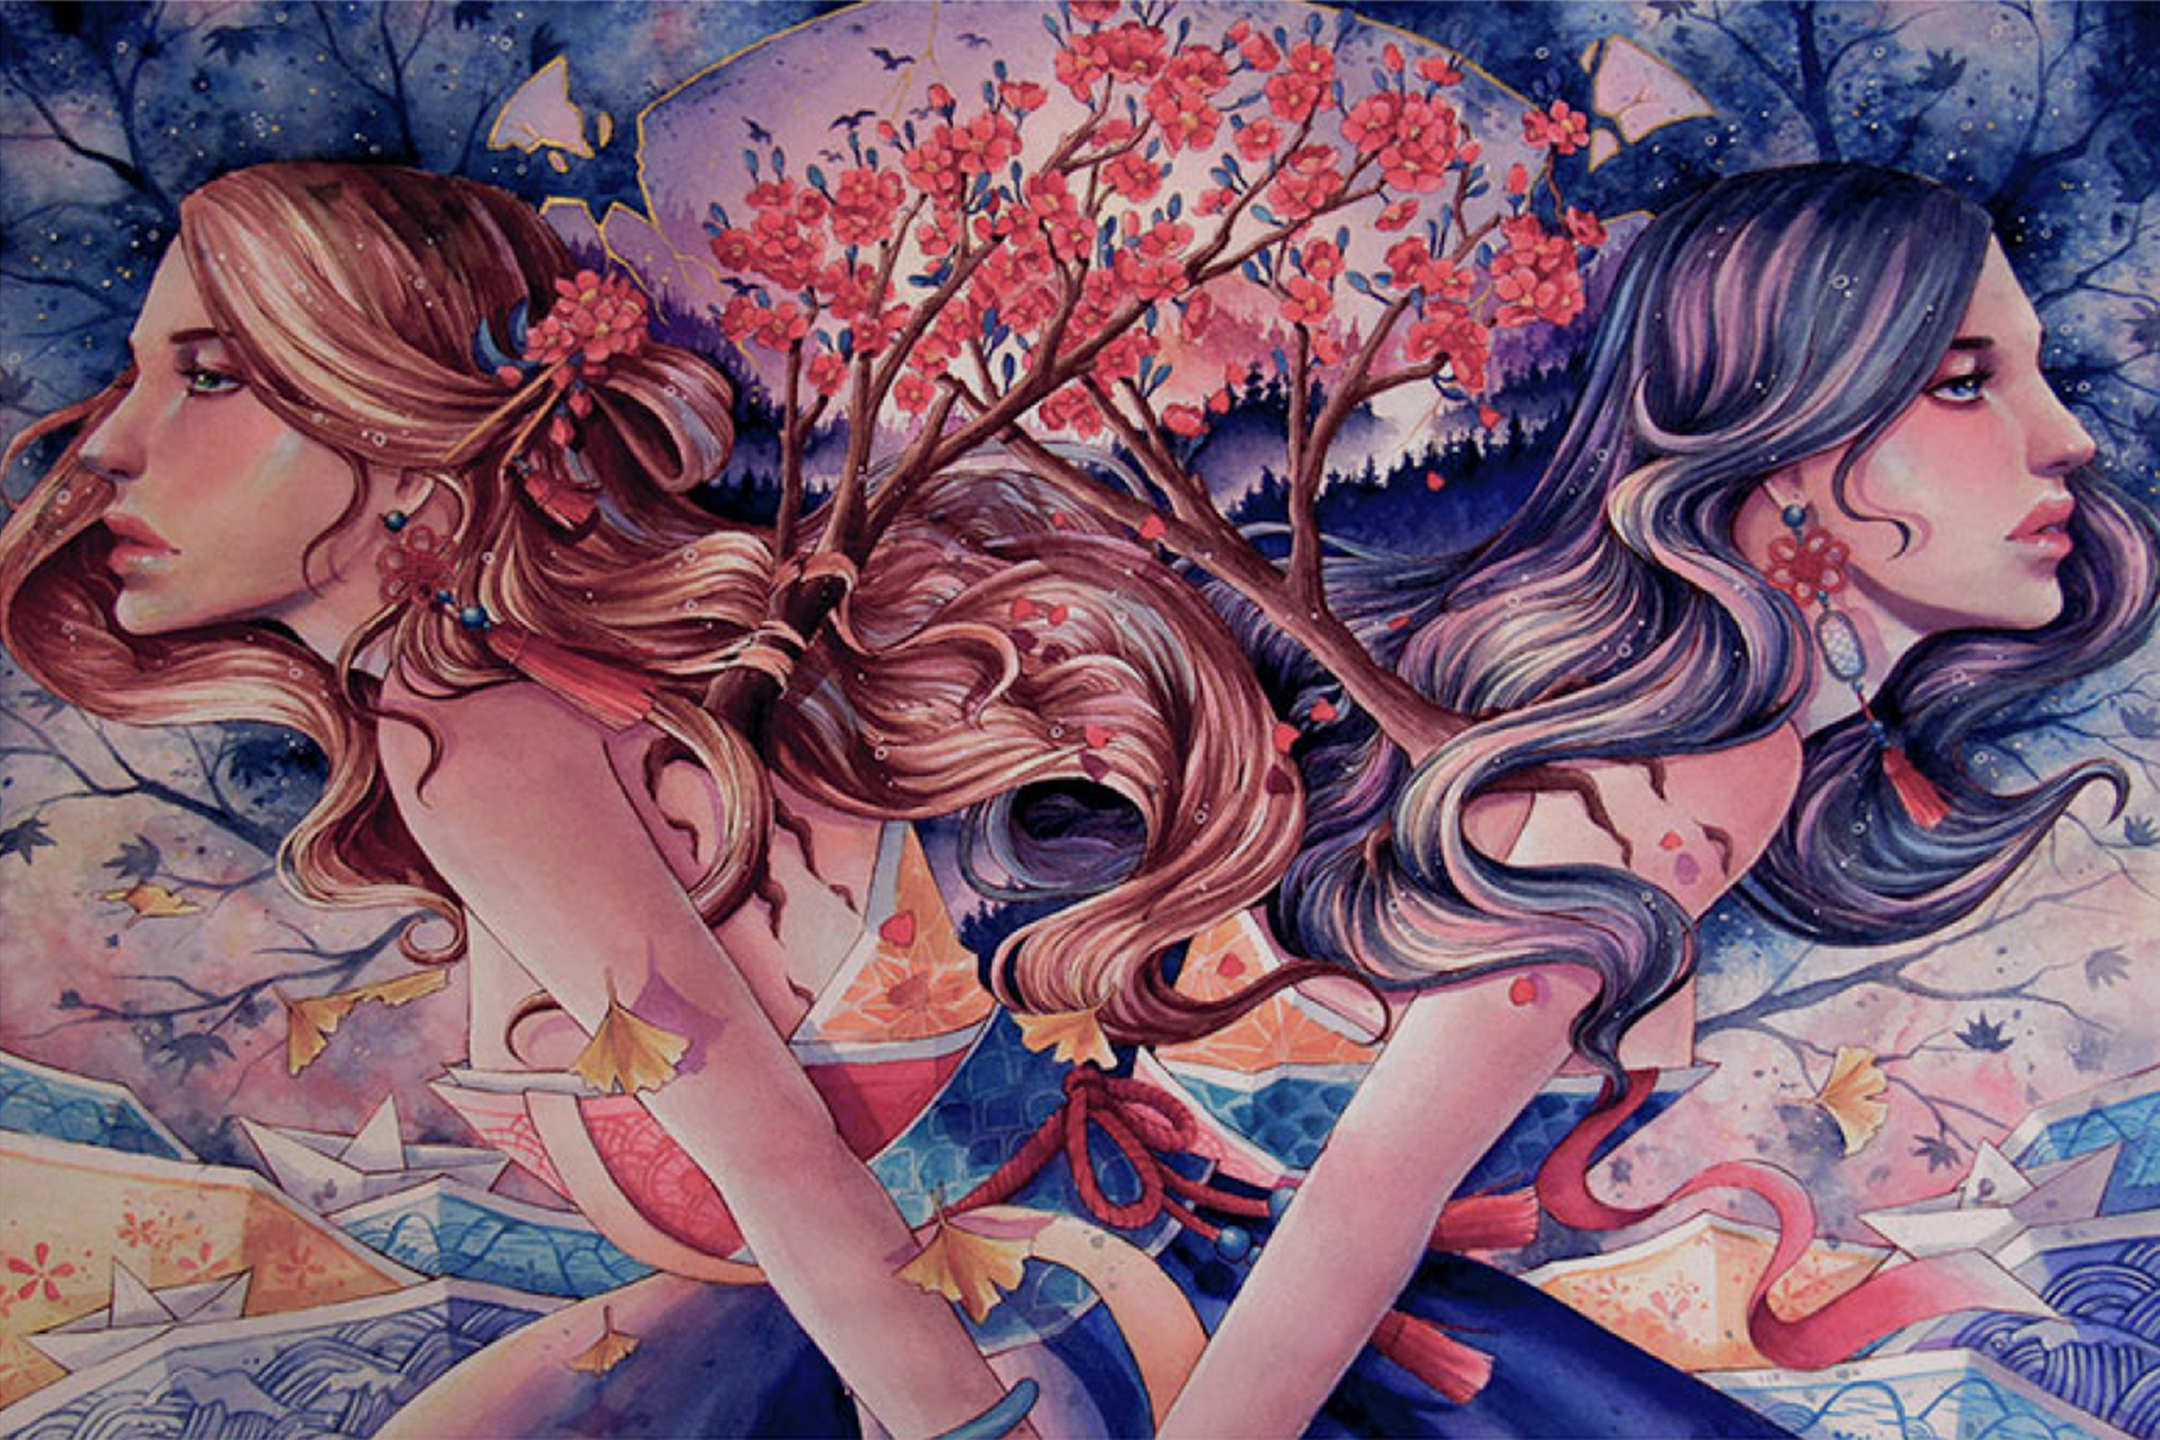 Painting of two young woman, moving in opposite directions from a common central point, with a tree of flowers growing between them